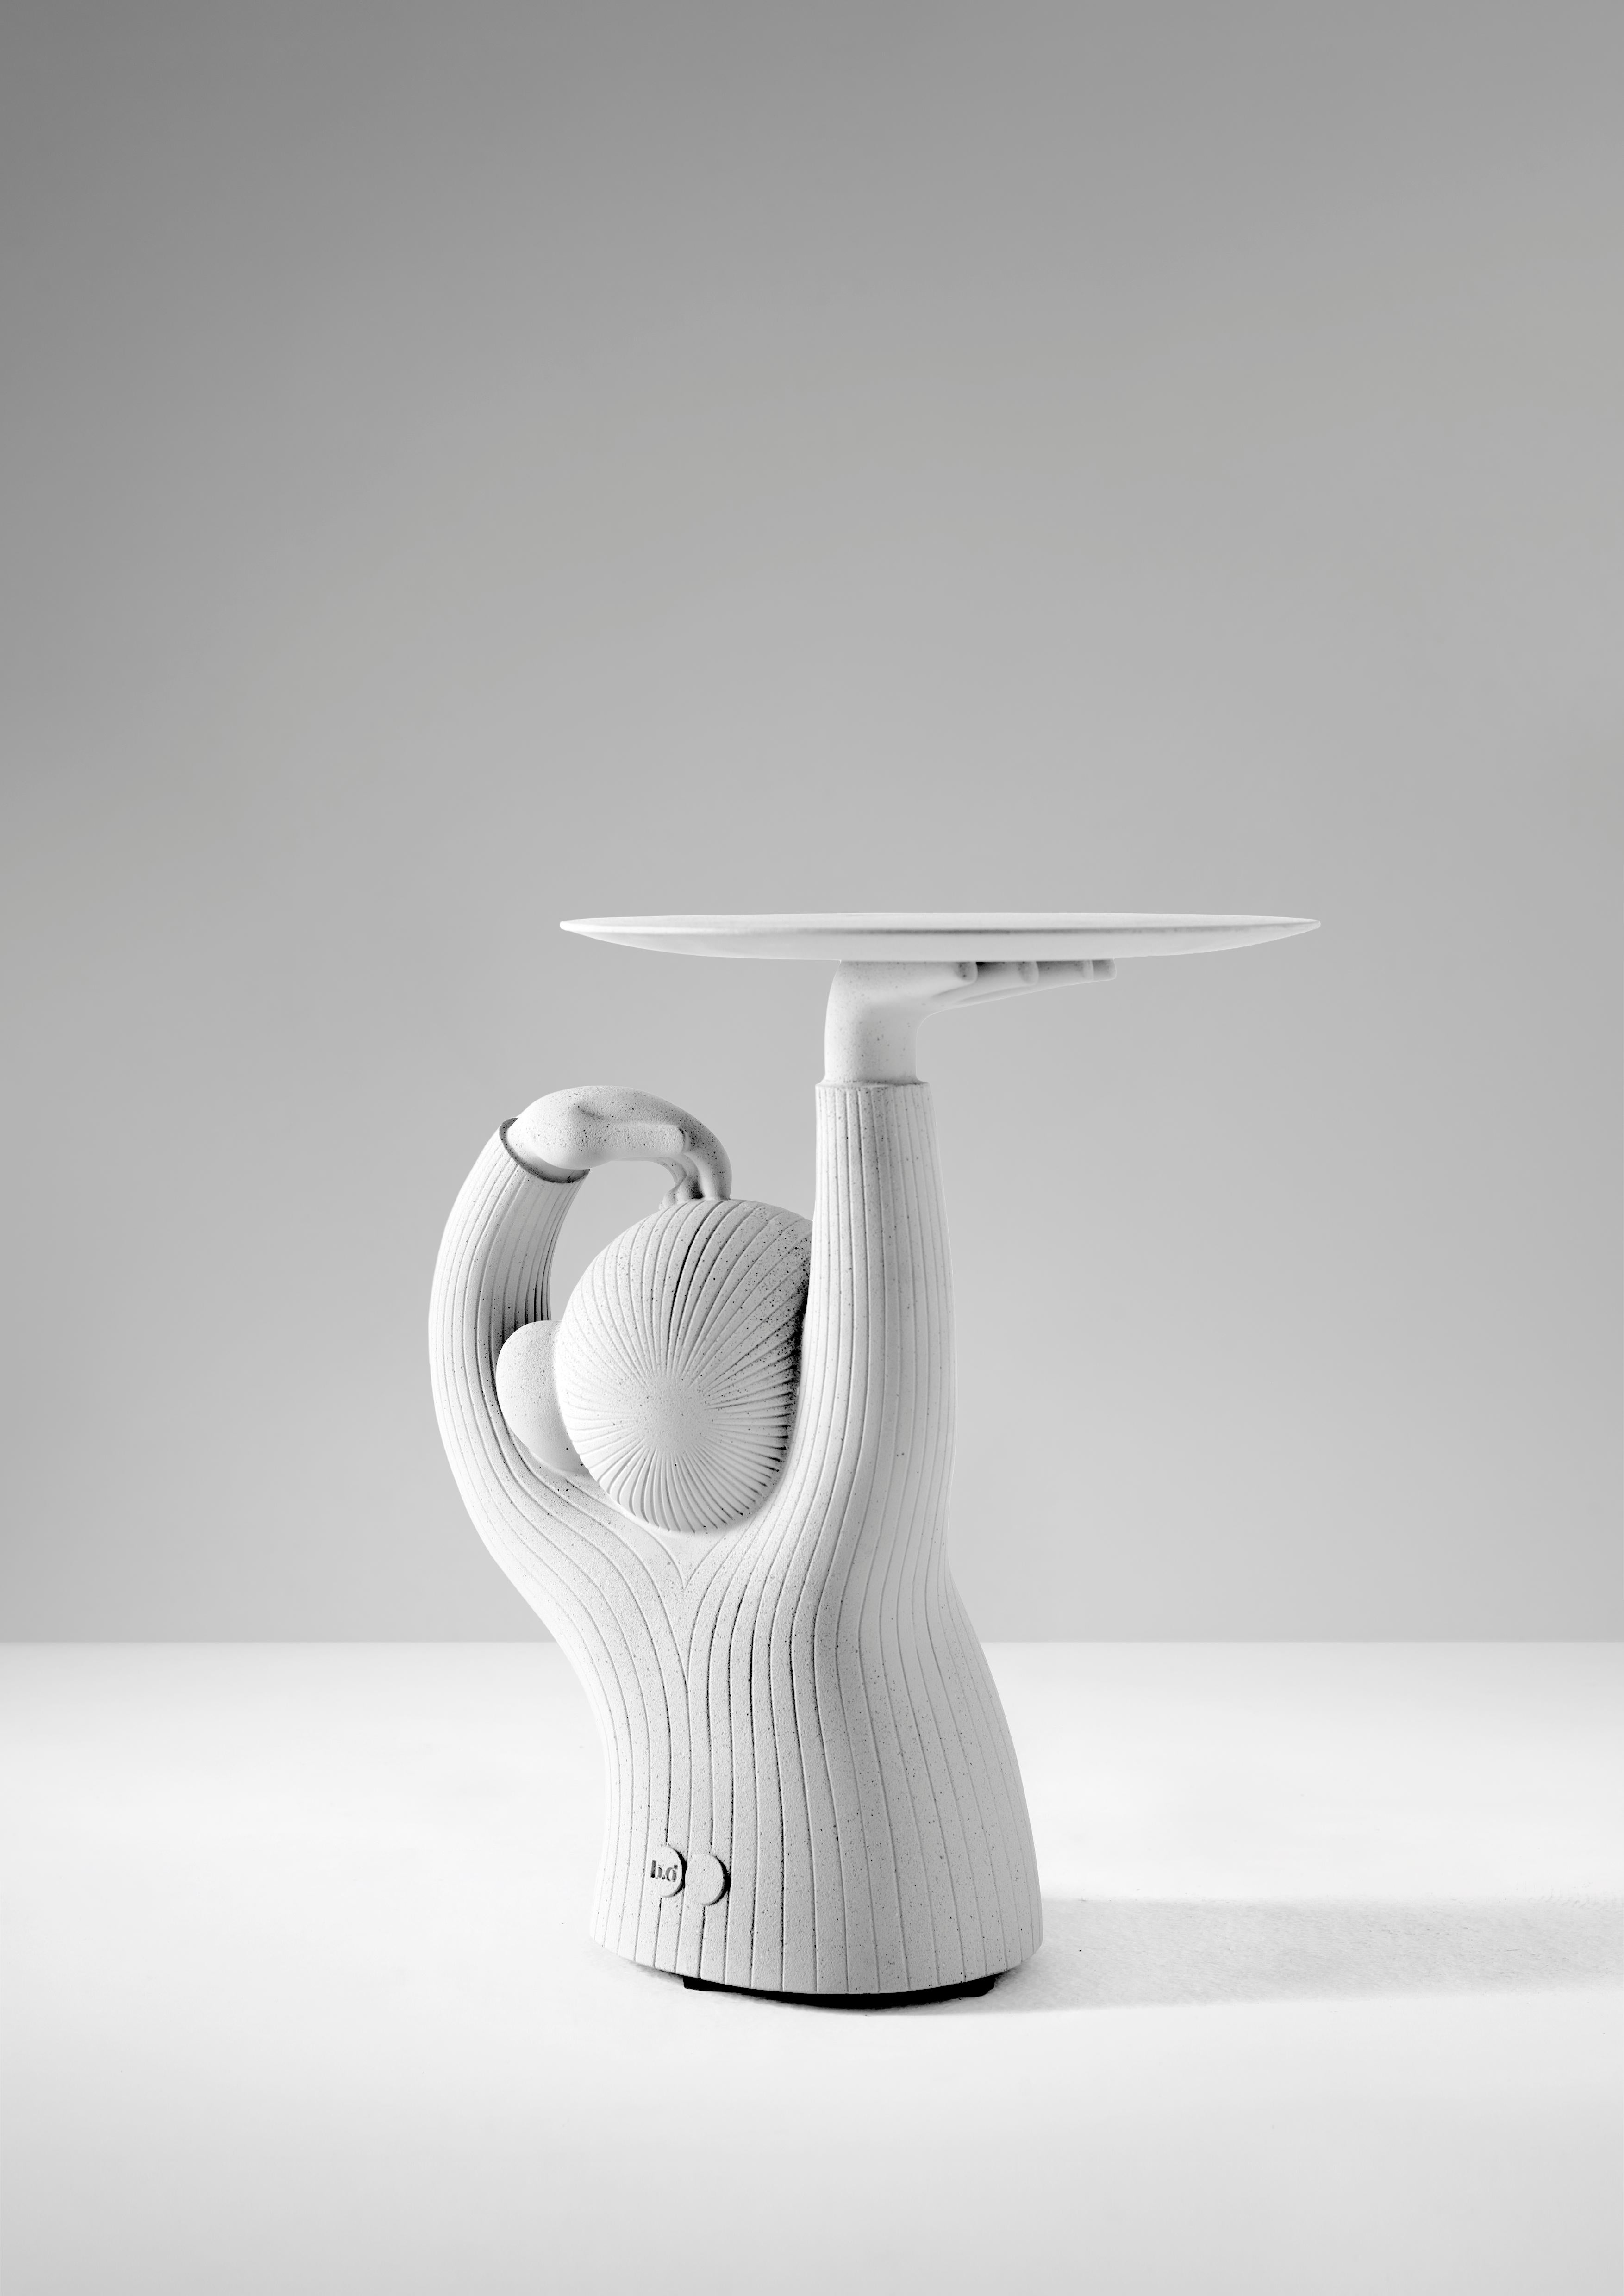 The playful design for a practical side table illustrates both the weighty and plastic qualities of architectural concrete.

Jamie Hayon’s quirky sense of humor and idiosyncratic world view has made him one of Spain’s most renowned contemporary